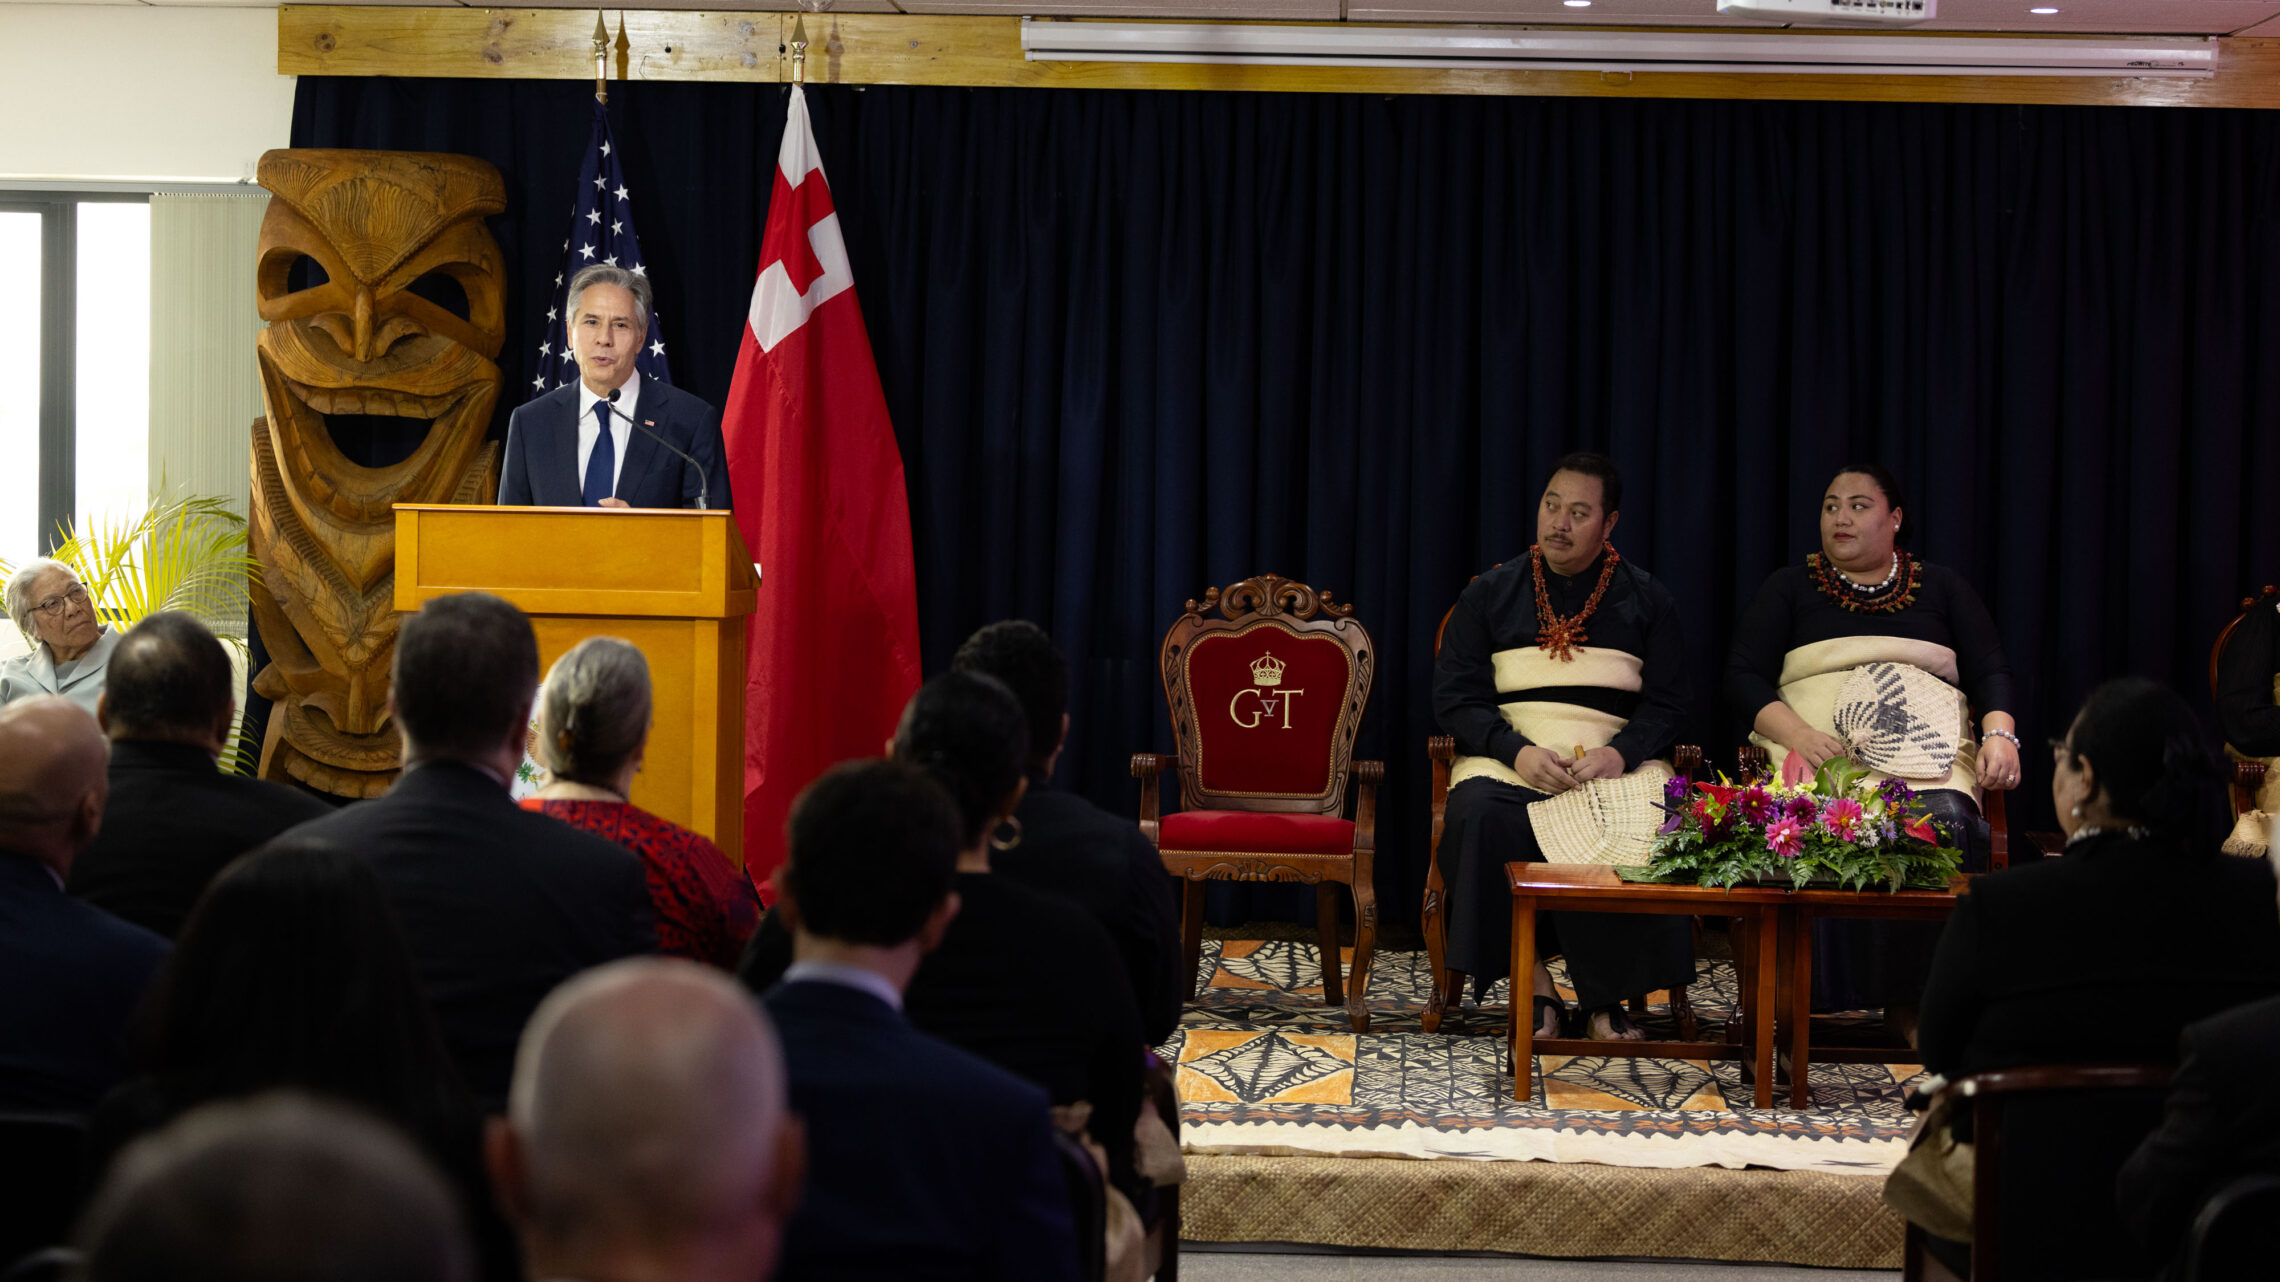 Secretary Blinken speaks from behind a lectern with the flags of the United States and Tonga behind him. Tonga's Crown Prince Tupouto'a 'Ulukalala and Crown Princess Sinaitakala are seated in chairs on stage. People in the audience are watching the dedication of the new U.S. embassy in Tonga, in Nuku'alofa